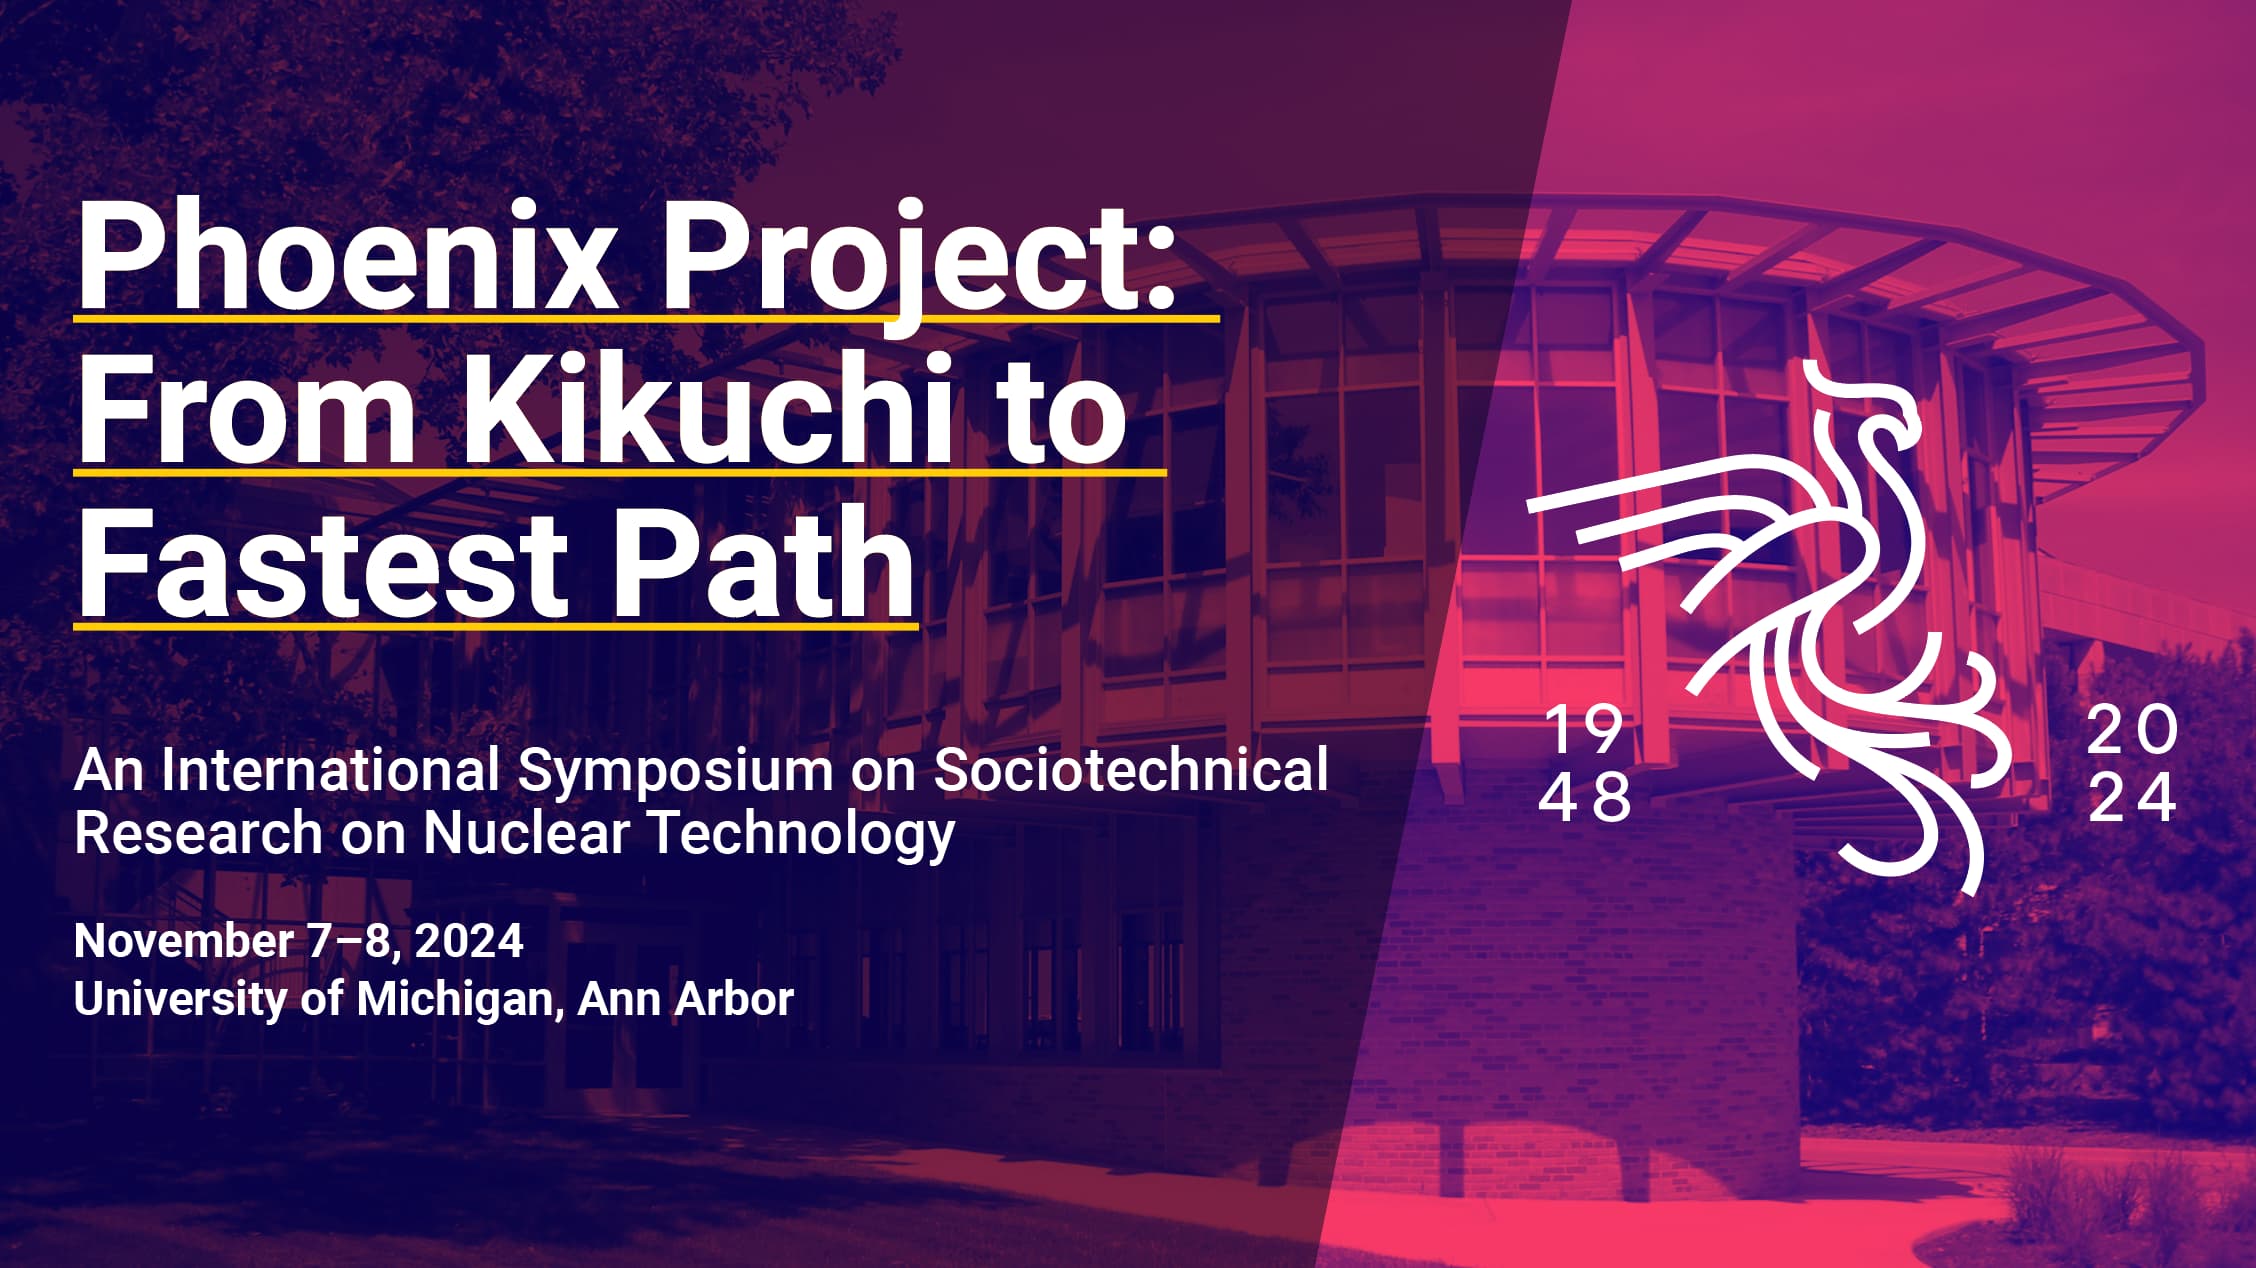 Phoenix Project: From Kikuchi to Fastest Path event imagery